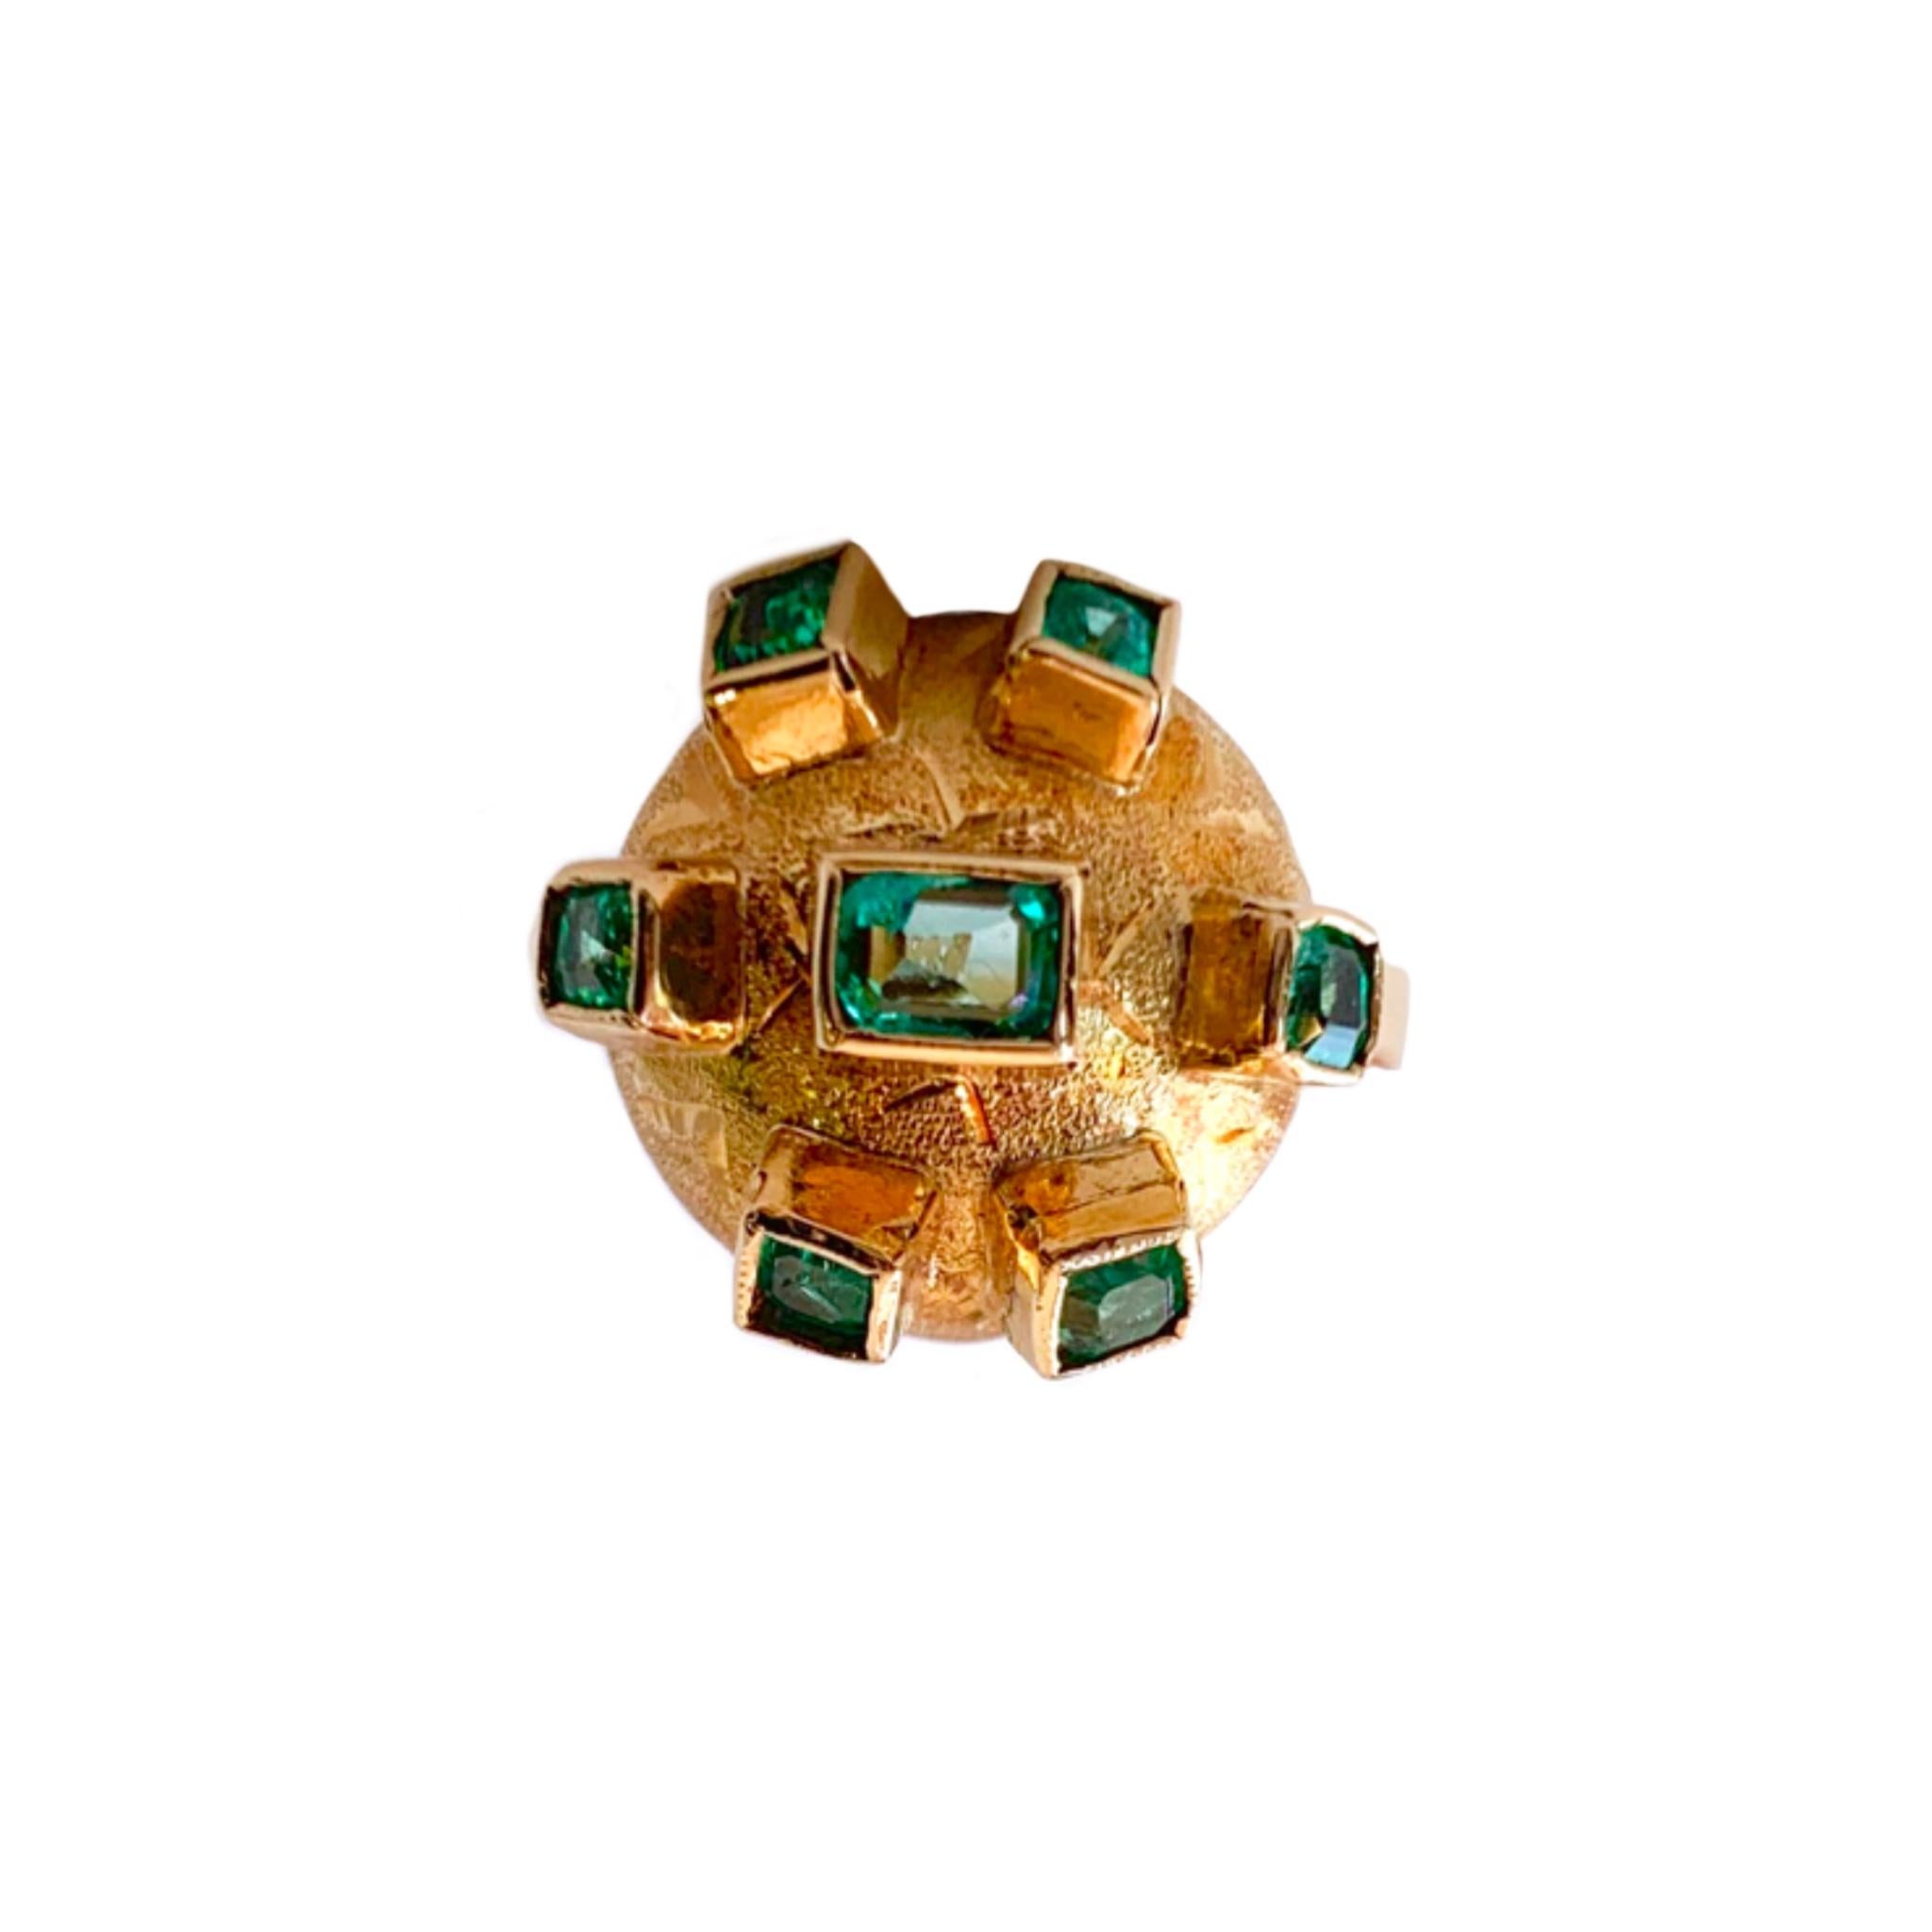 This 18 karat yellow gold beauty has 7 very fine Colombian emeralds with total weight of approximately 1.00 carats.